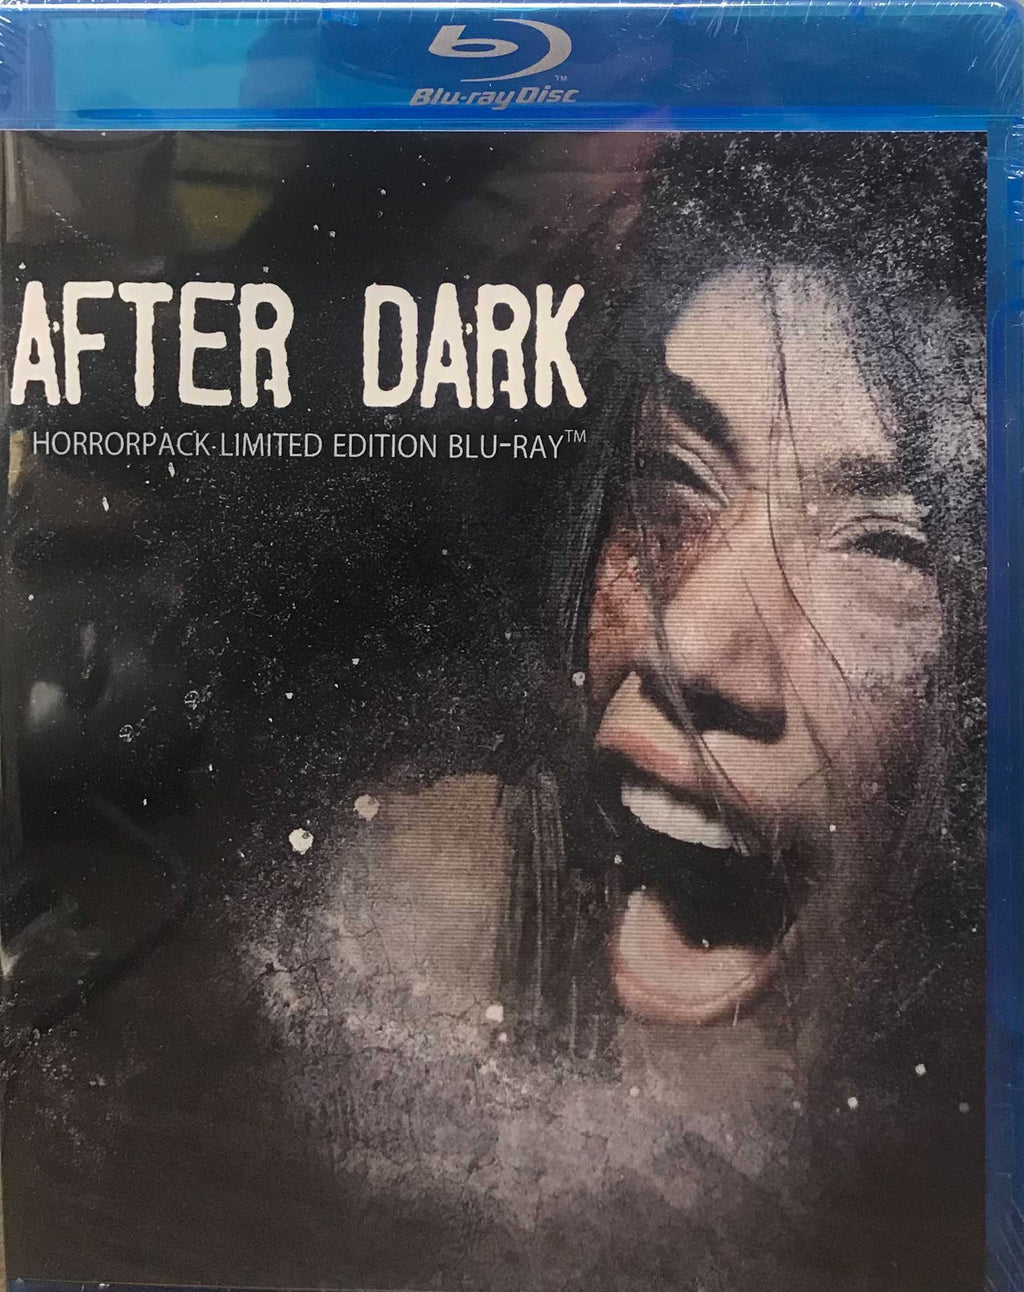 After Dark - HorrorPack Limited Edition Blu-ray #57